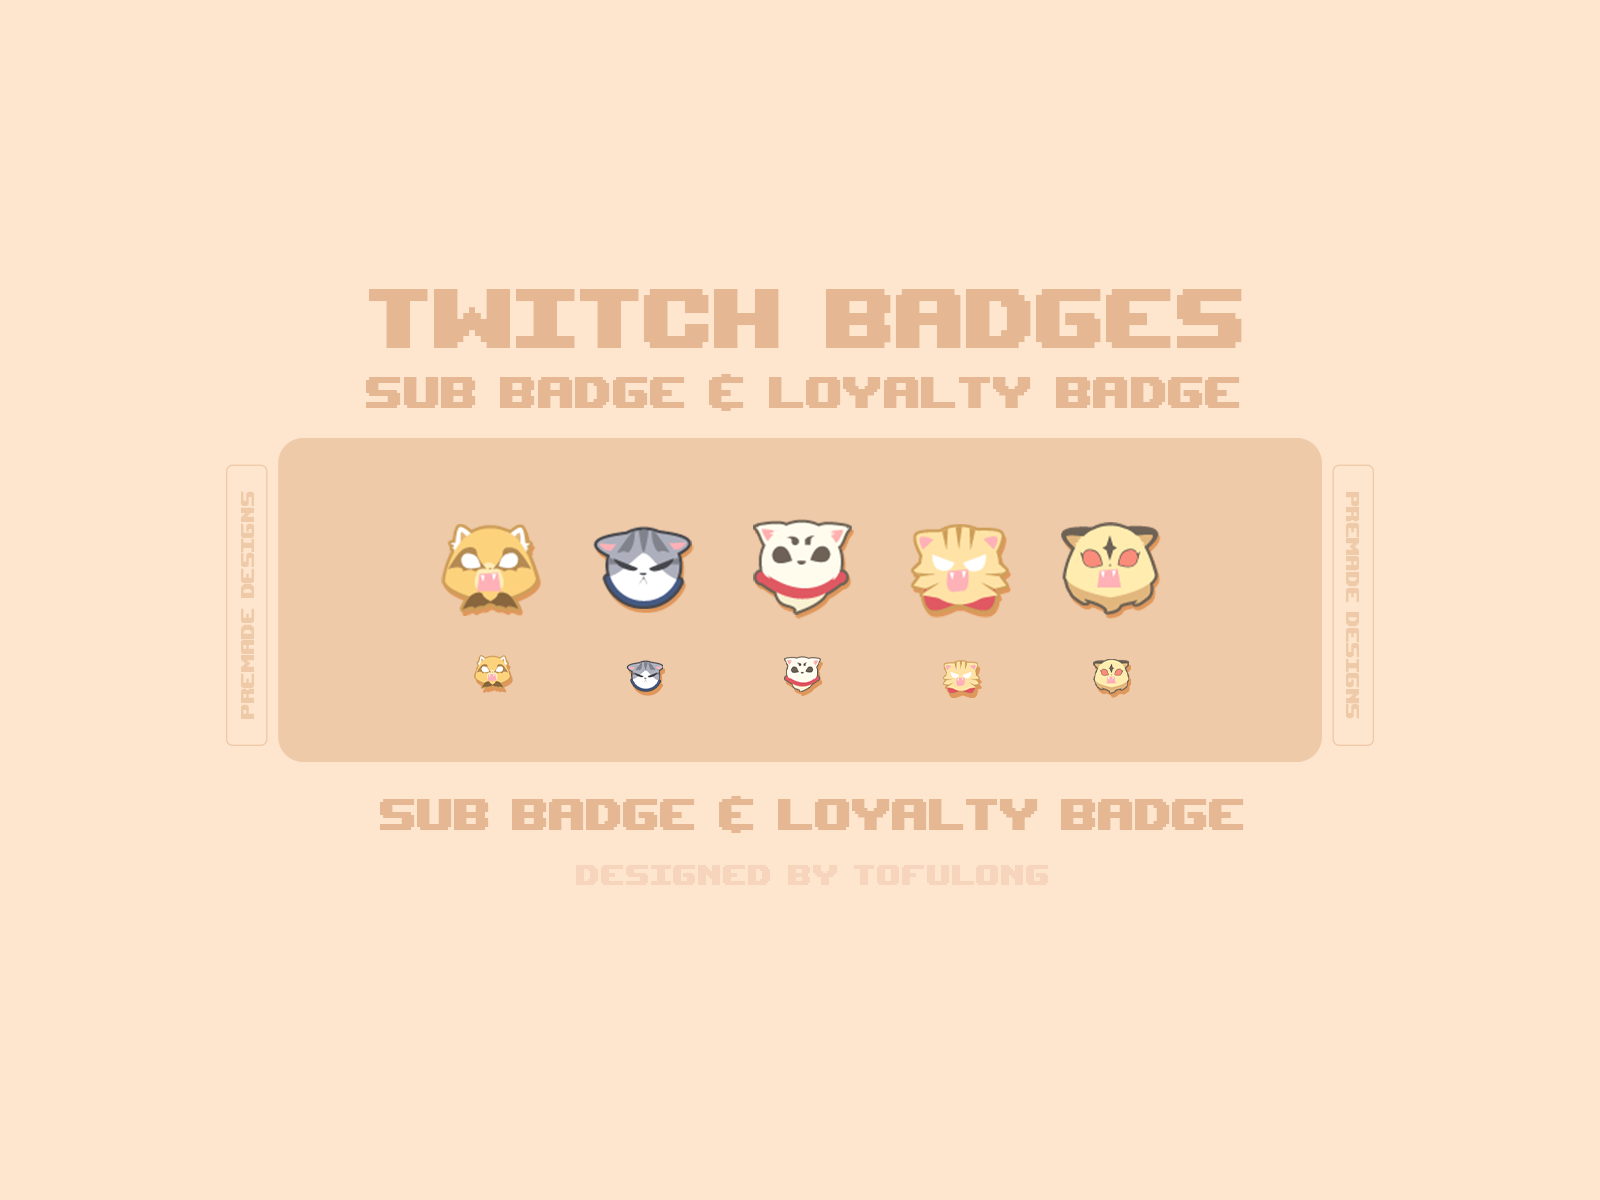 Drawing  Illustration Twitch badges One piece chibi twitch badges Anime  twitch badges kawaii twitch badges Art  Collectibles etnacompe